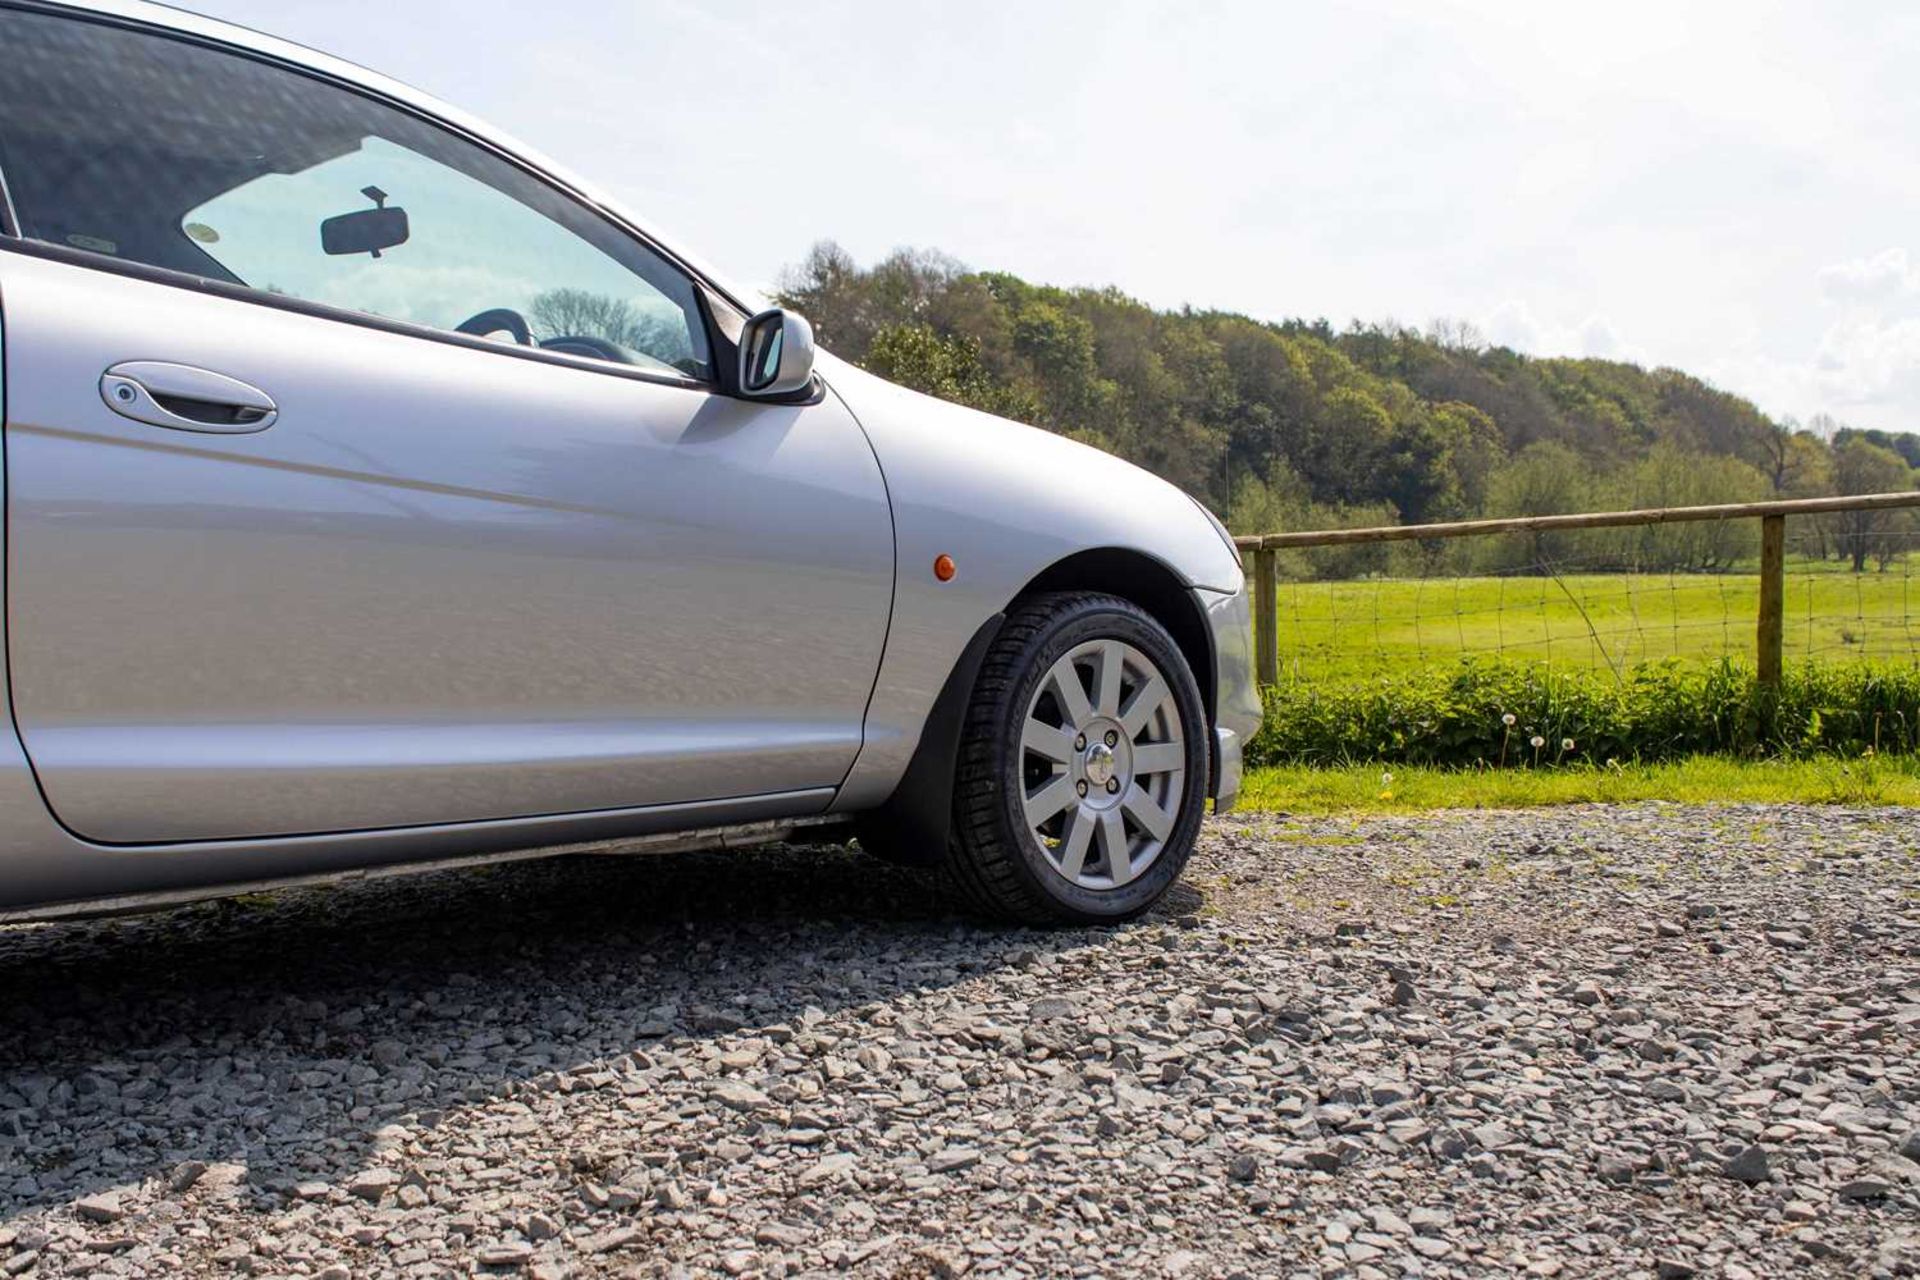 2001 Ford Puma Only 28,000 miles from new  - Image 34 of 99